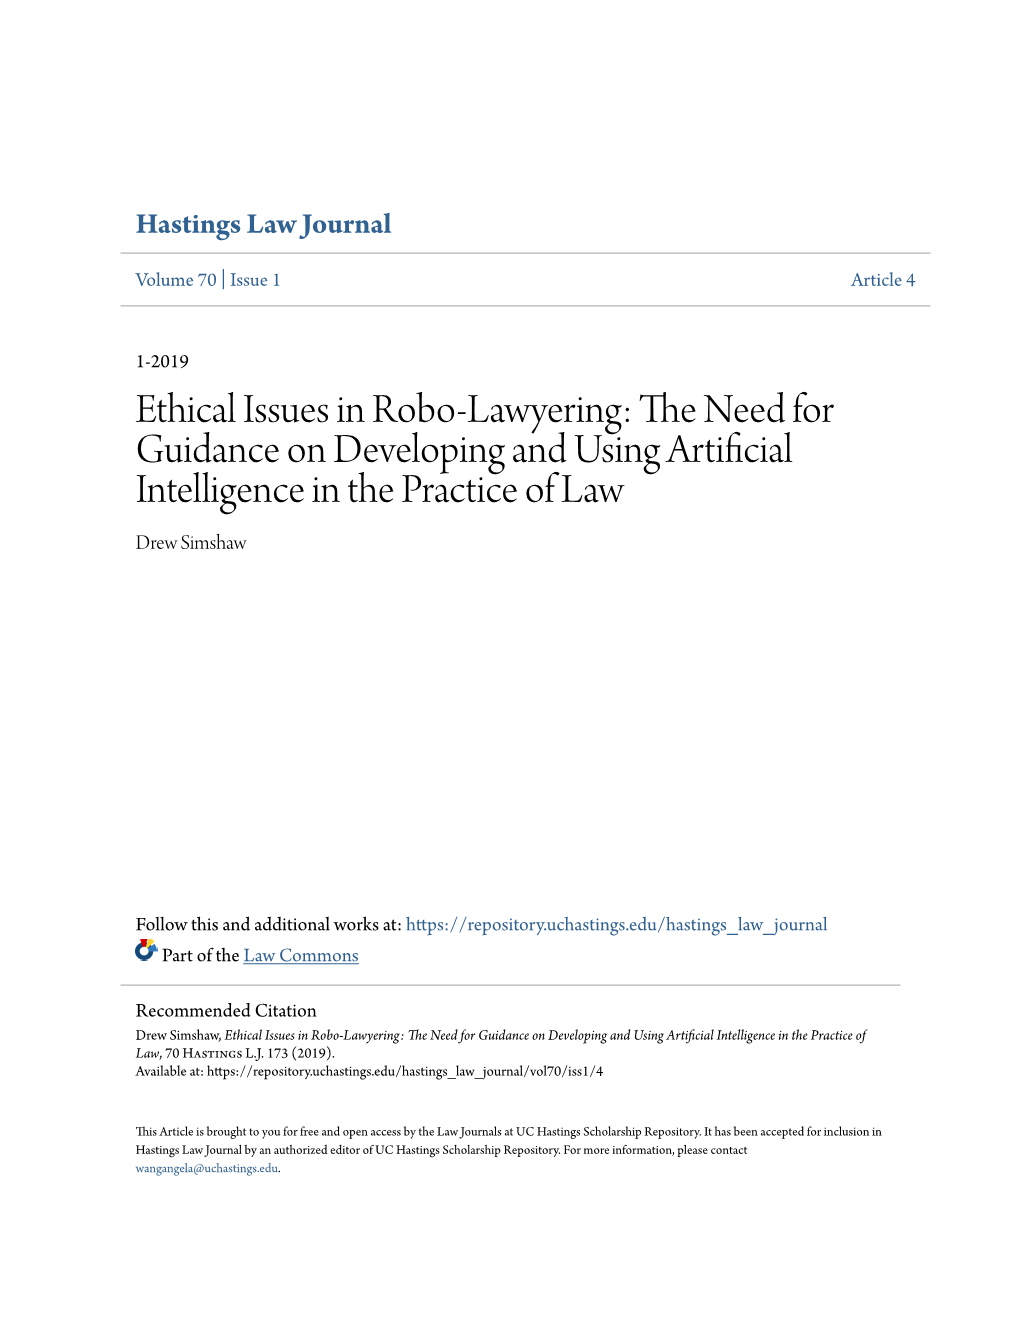 Ethical Issues in Robo-Lawyering: the Eedn for Guidance on Developing and Using Artificial Intelligence in the Practice of Law Drew Simshaw